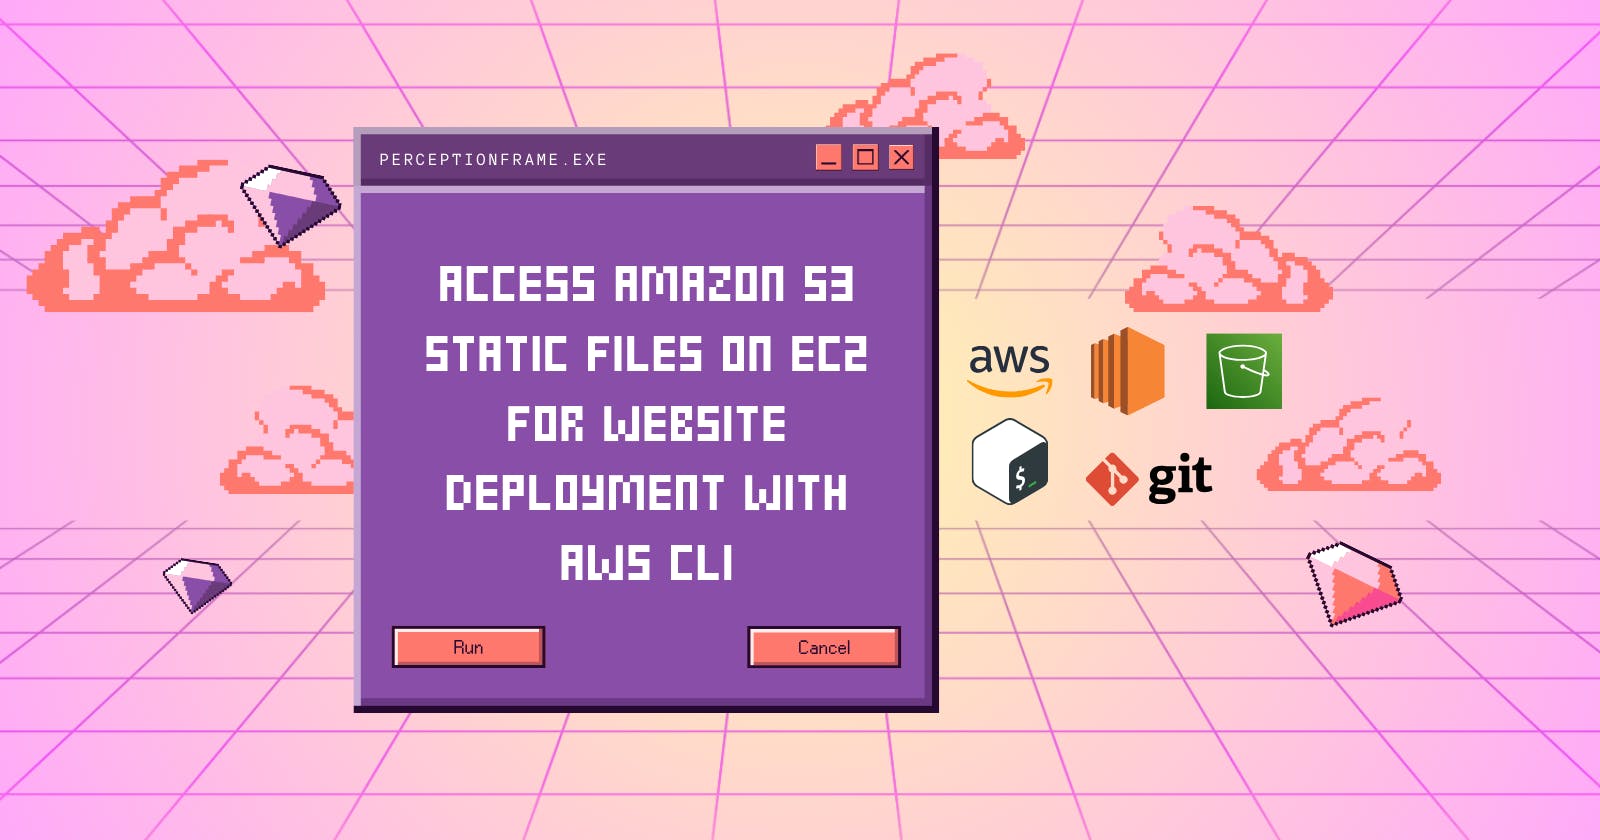 Access Amazon S3 static files on EC2 for website deployment with AWS CLI